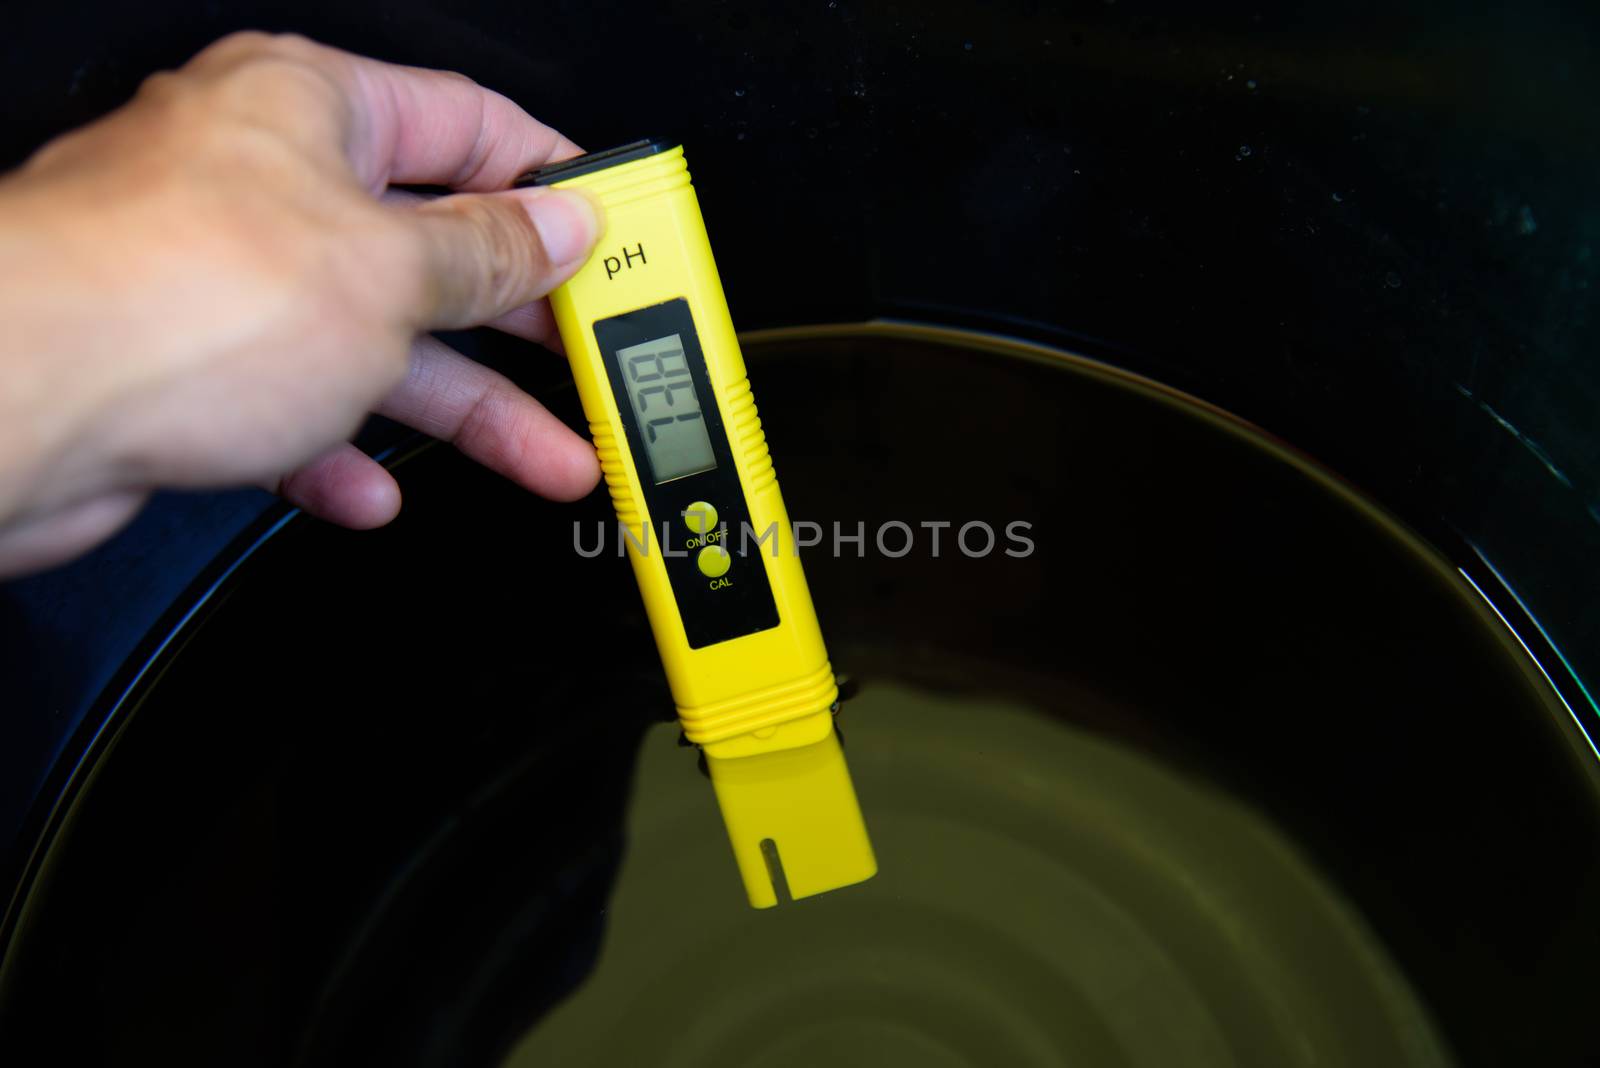 Use Ph meter check the Ph value of water by rukawajung